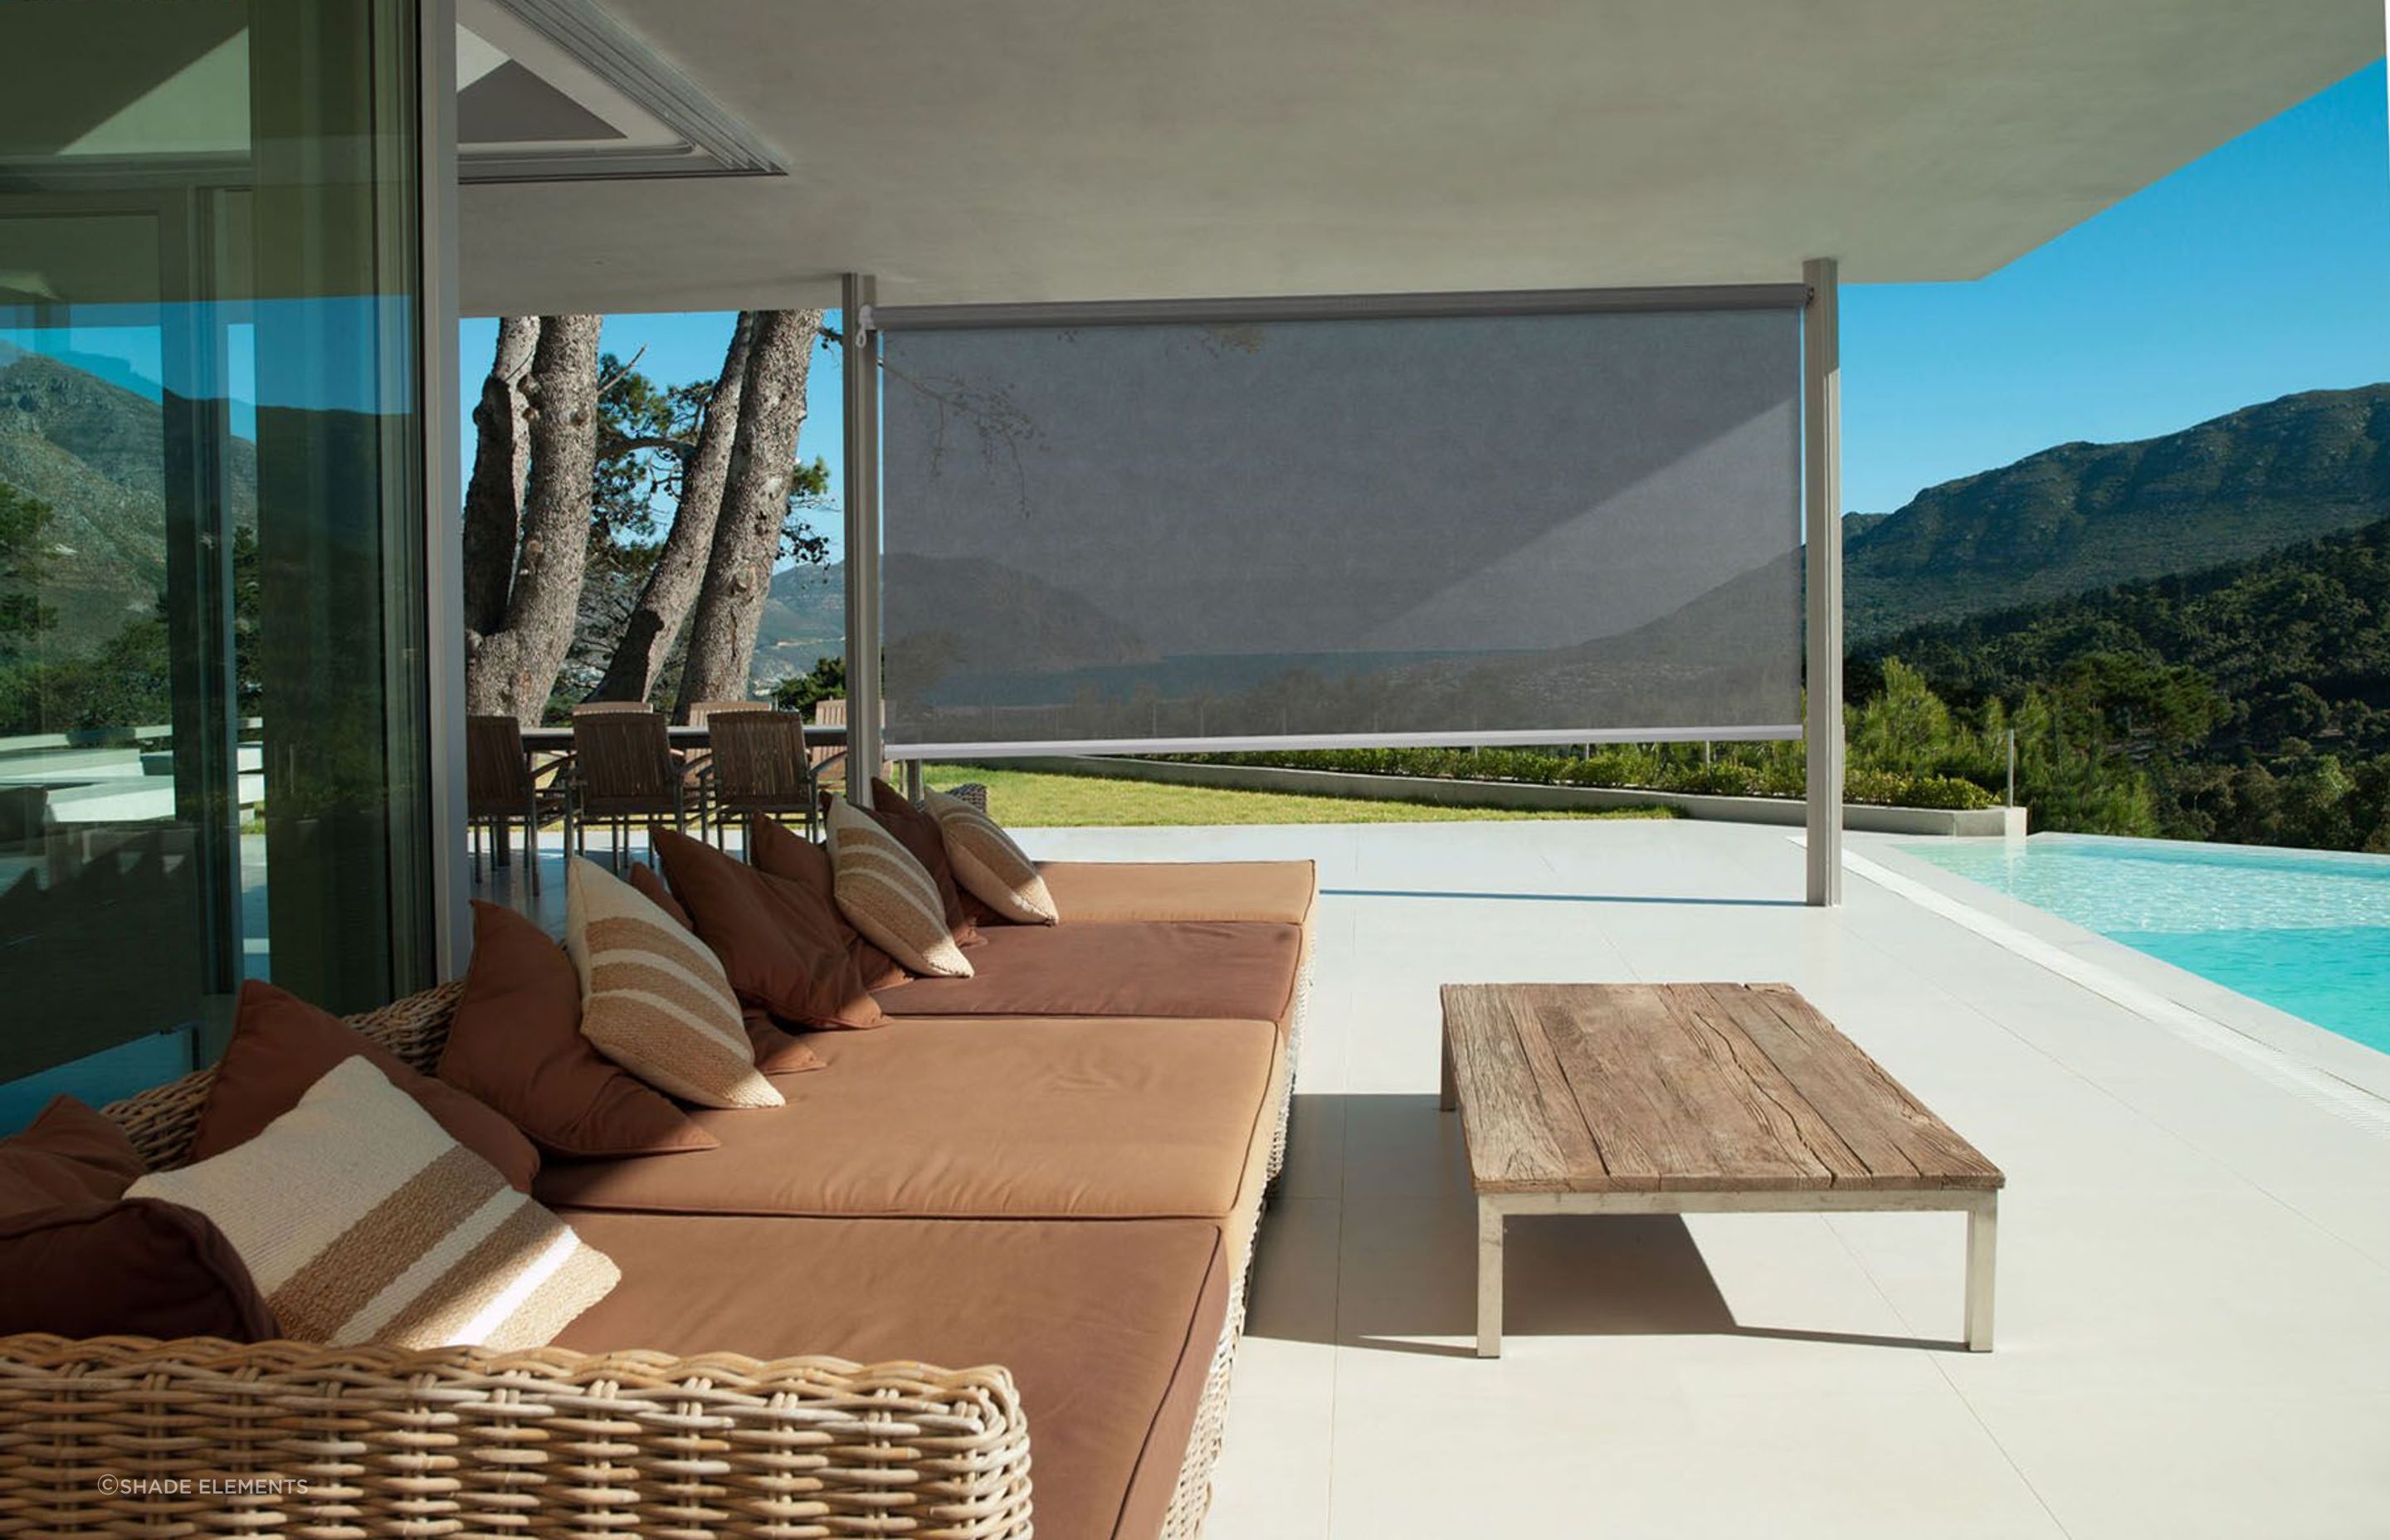 Outdoor blinds like the sleek Omni Screen provide privacy and protection where you need it most